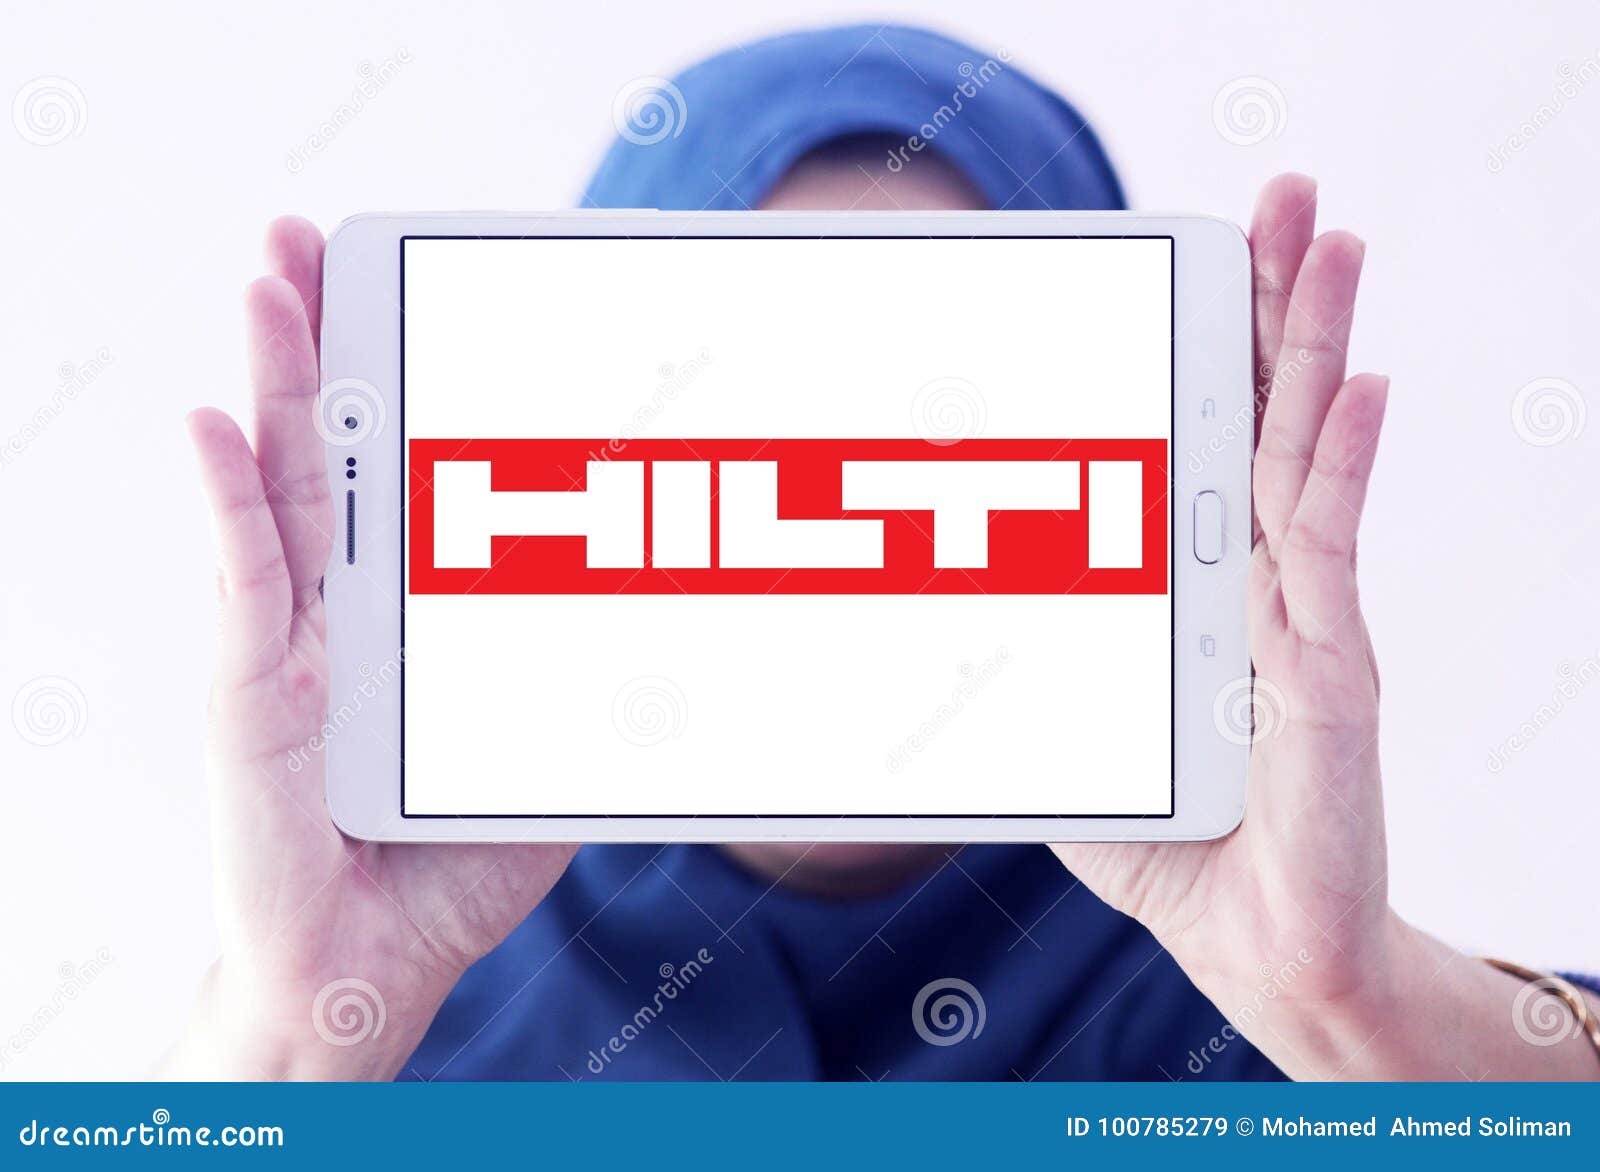 Hilti company logo editorial stock image. Image of hammers - 100785279